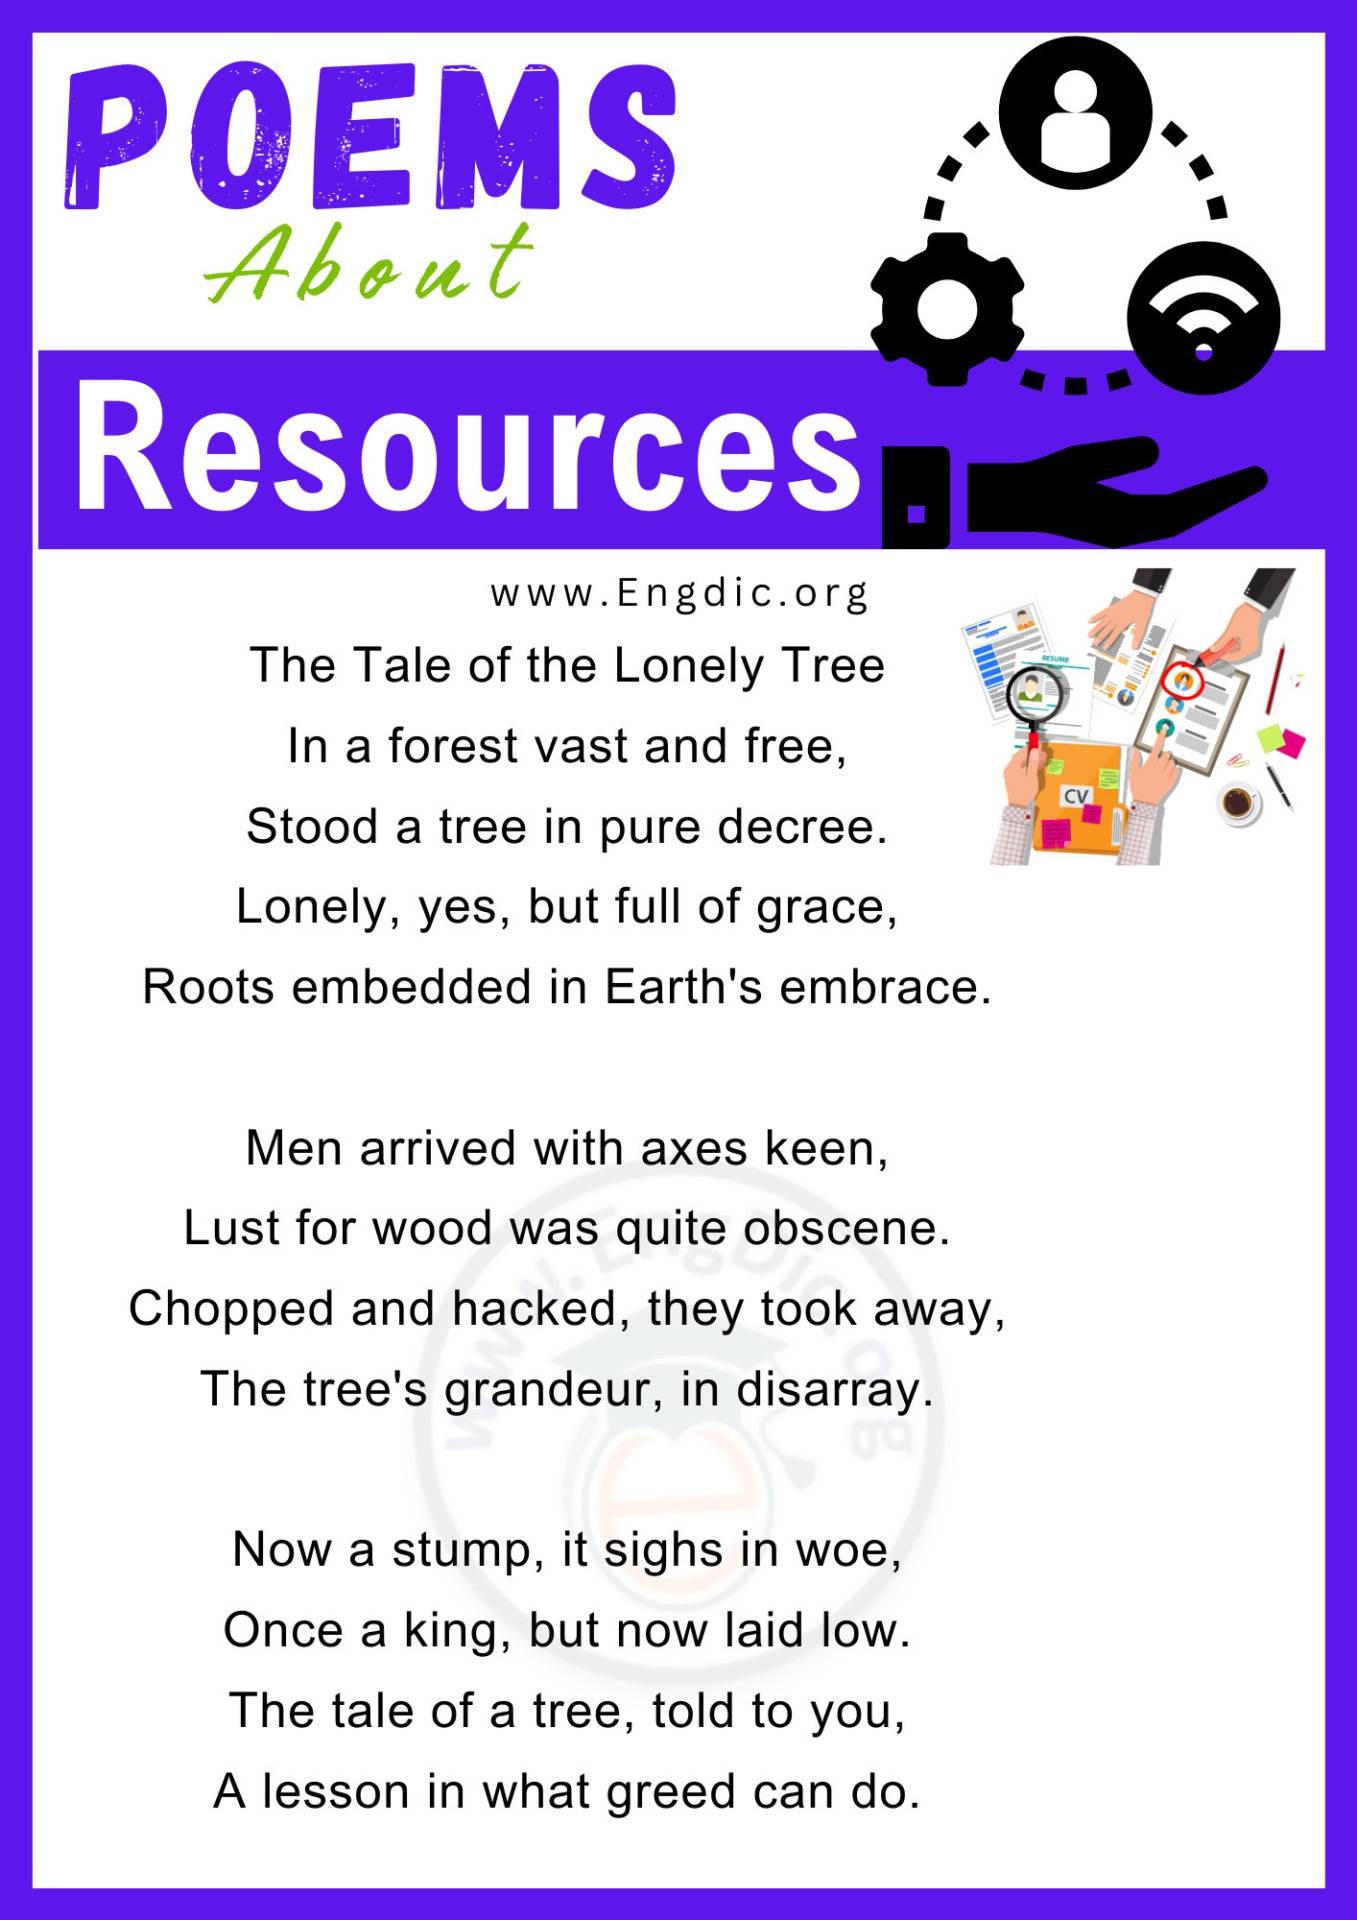 Poems for Resources